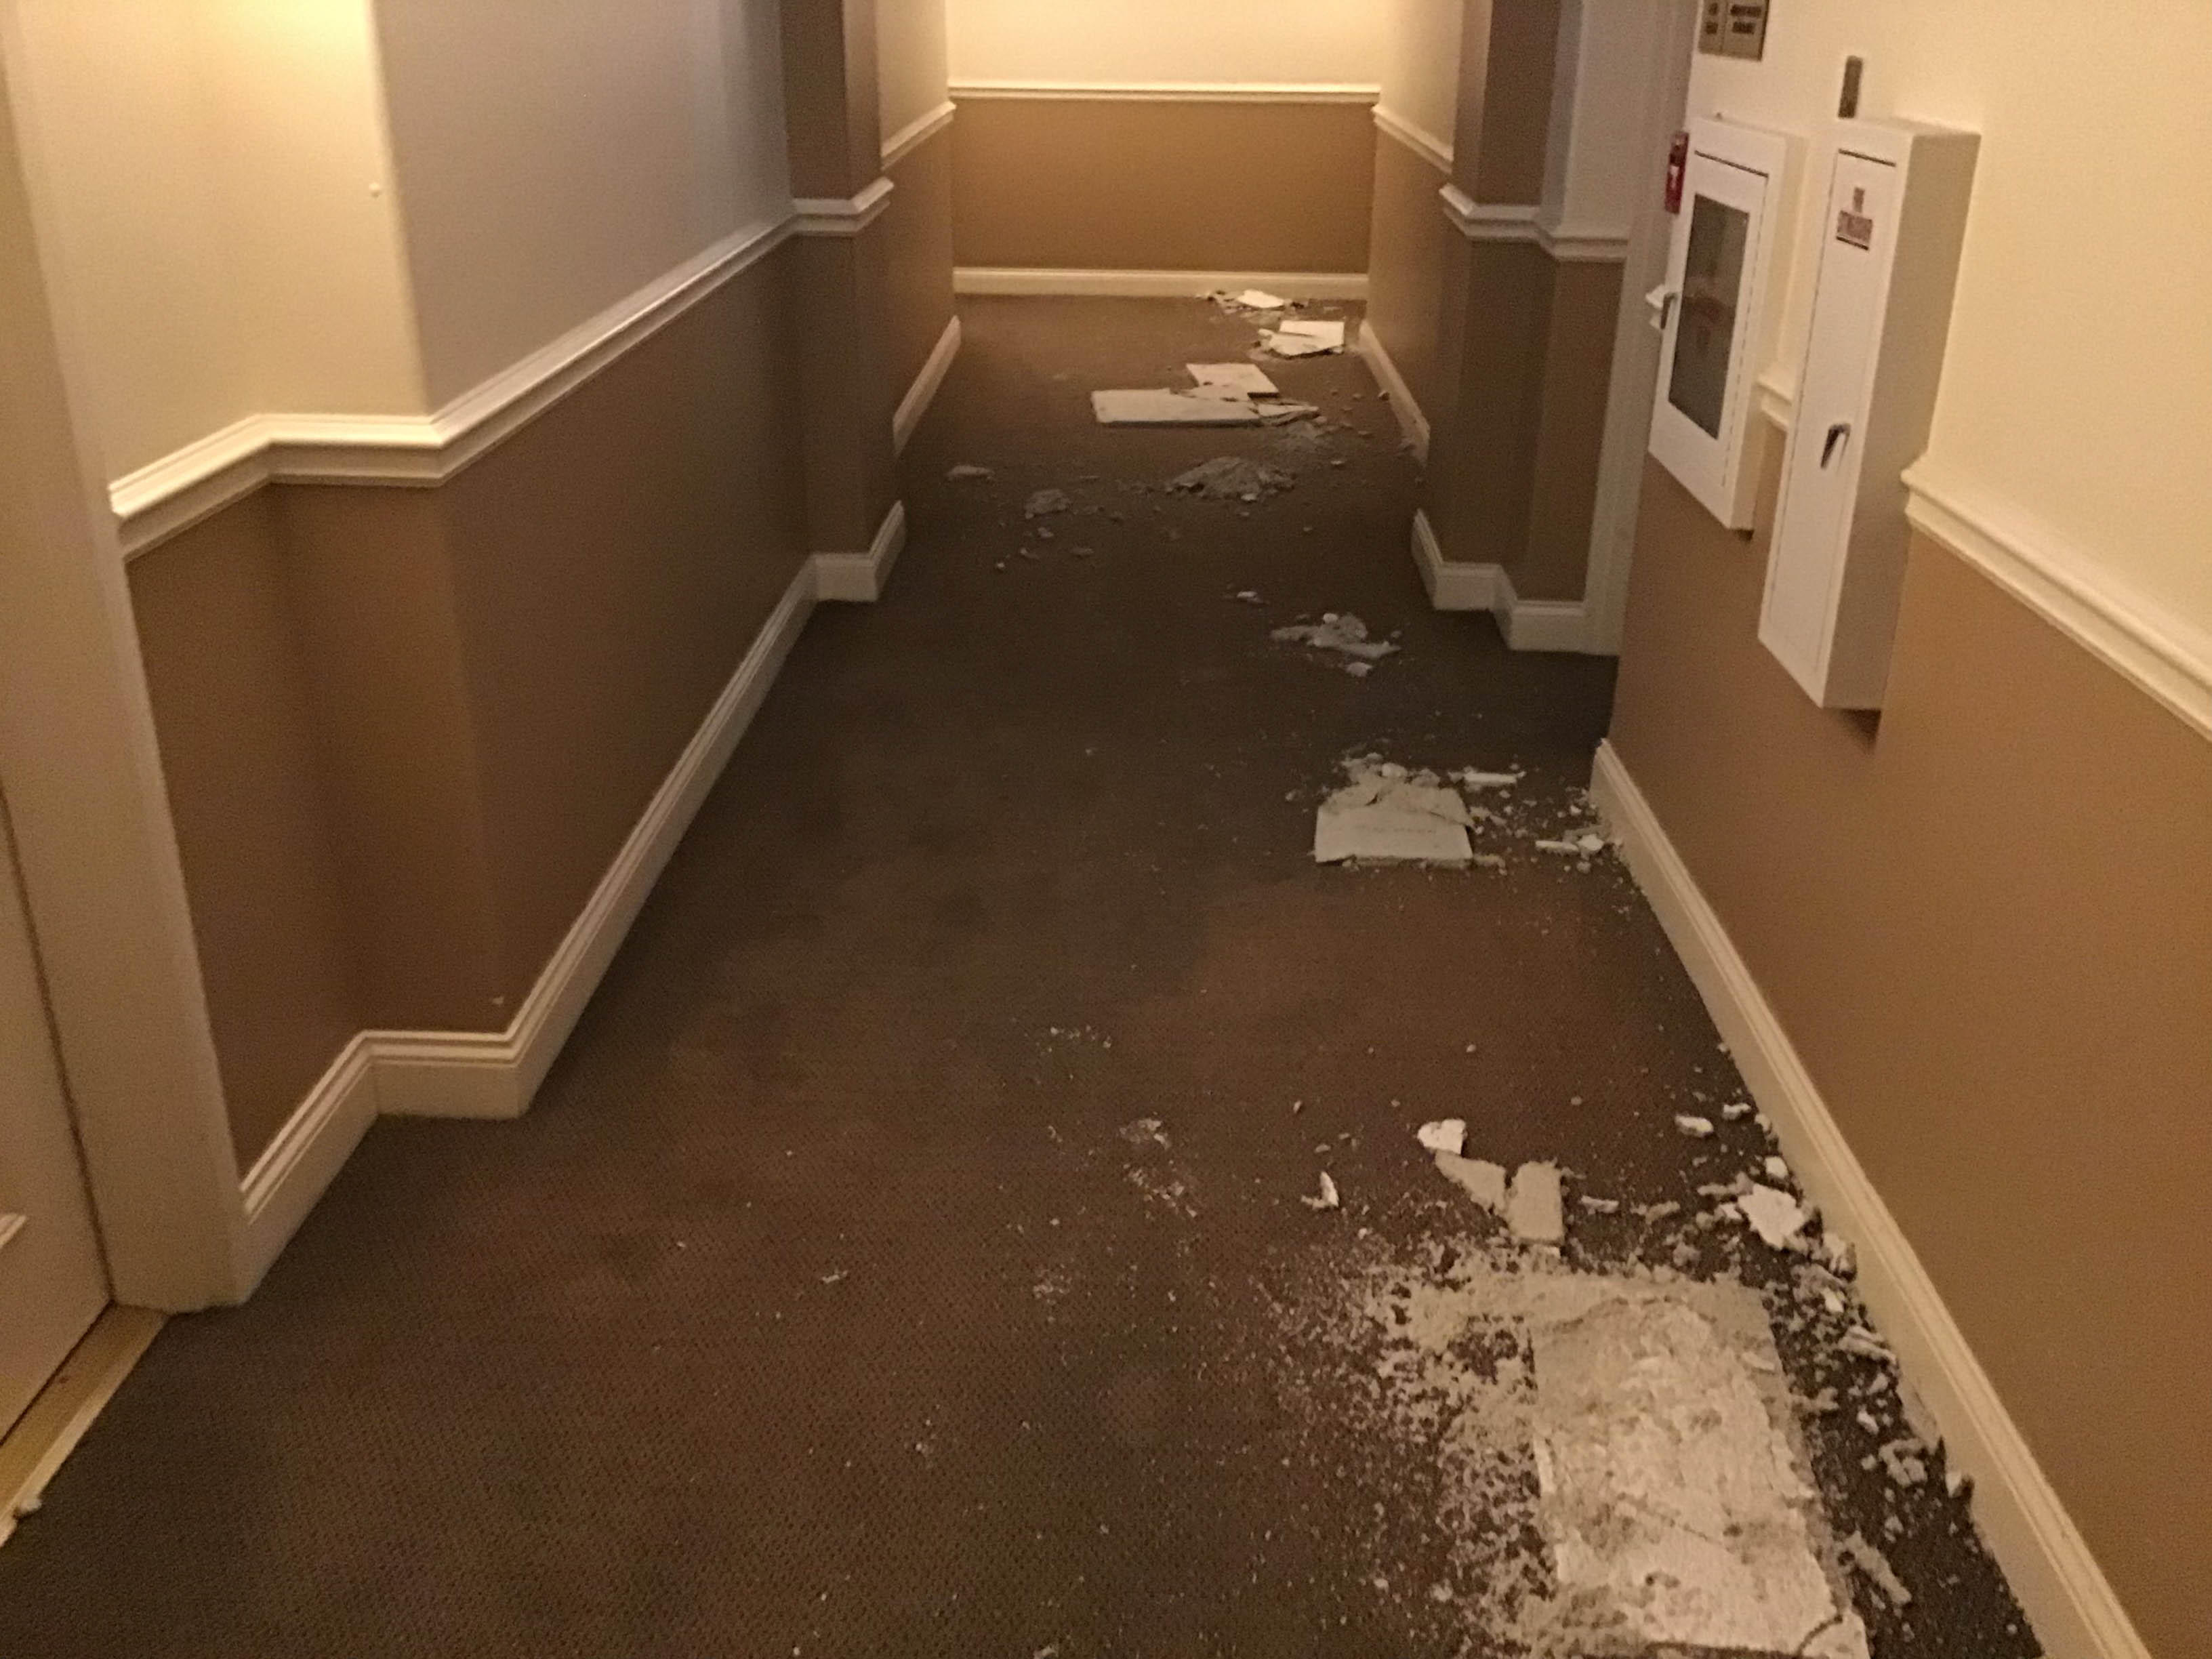 SERVPRO of Central Schaumburg/West Bloomingdale is the best choice when it comes to choosing a commercial restoration company. They are quicker to any disaster and can handle any size loss in the local area. Give us a call!